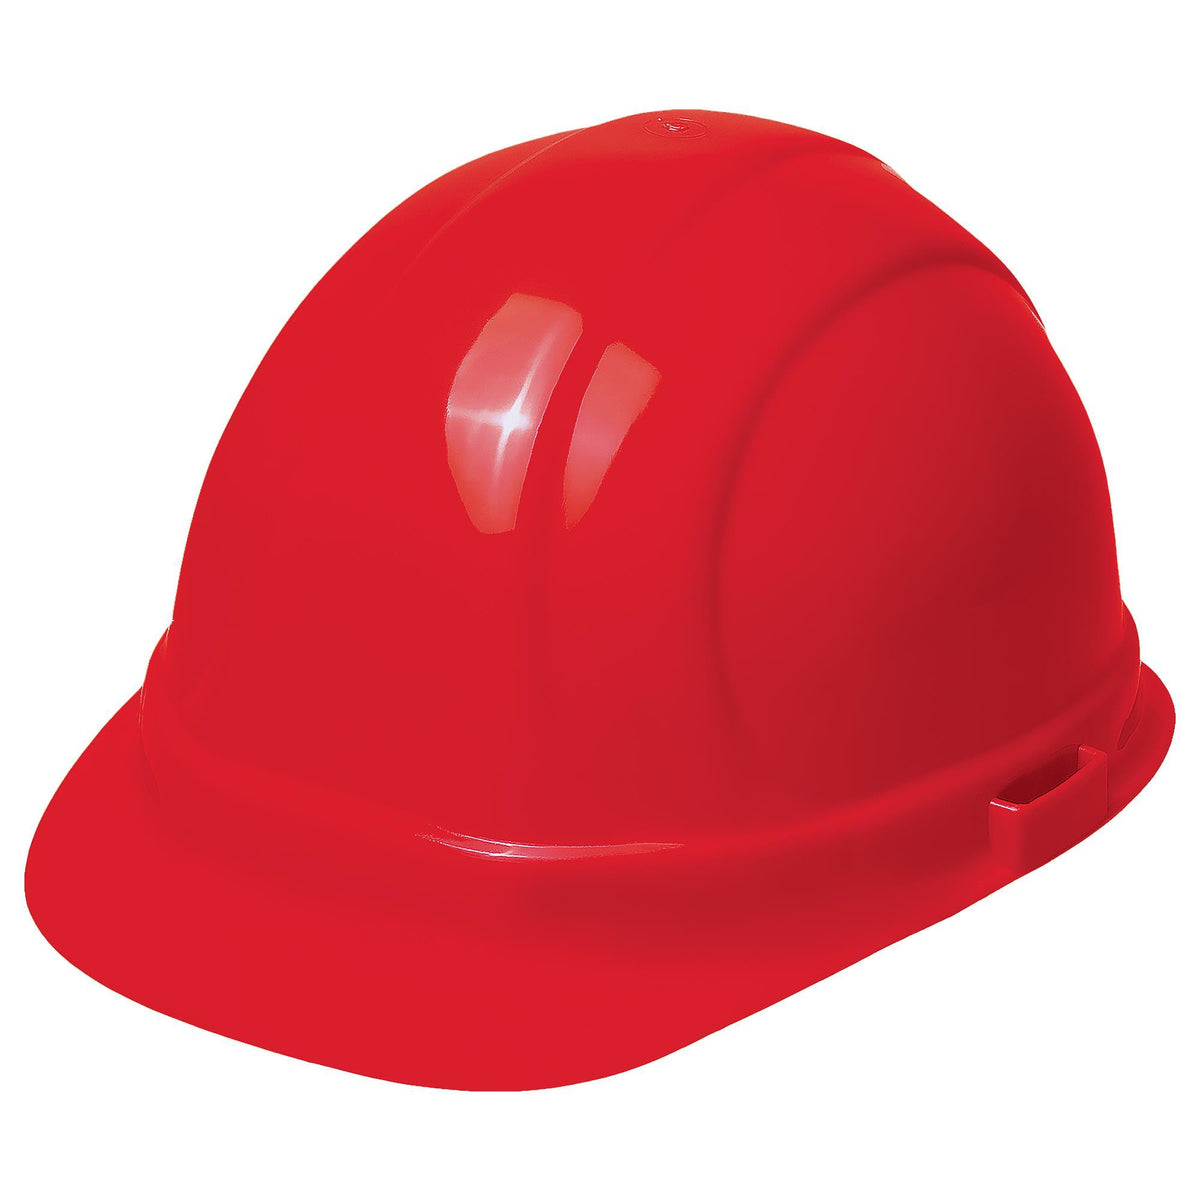 Omega II® Cap with Accessory Slots and 6-Point